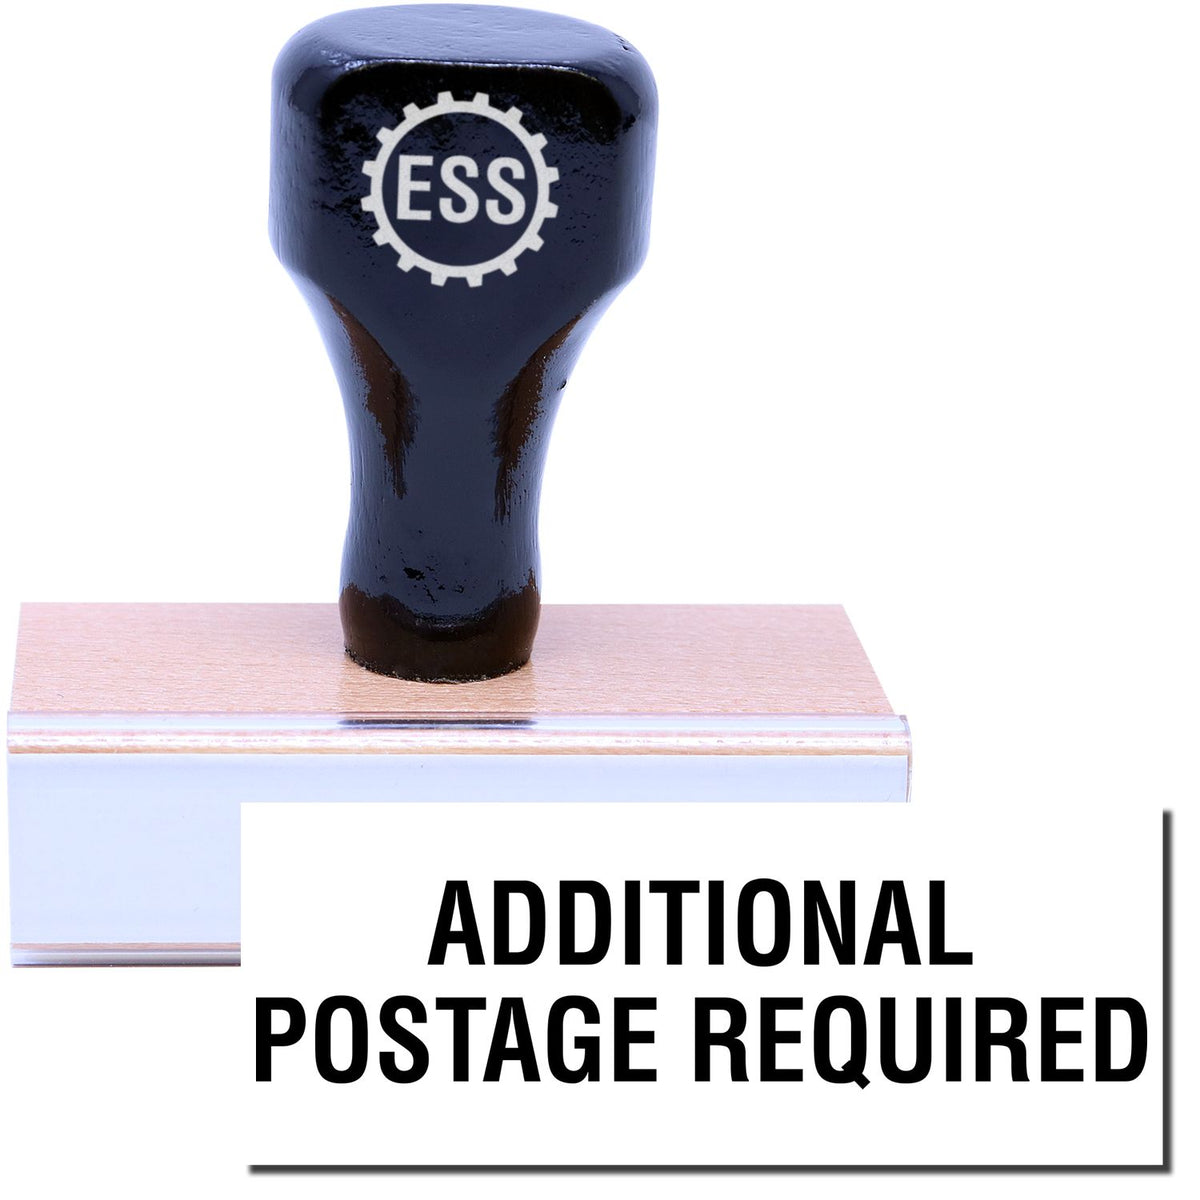 A stock office rubber stamp with a stamped image showing how the text &quot;ADDITIONAL POSTAGE REQUIRED&quot; in a large font is displayed after stamping.